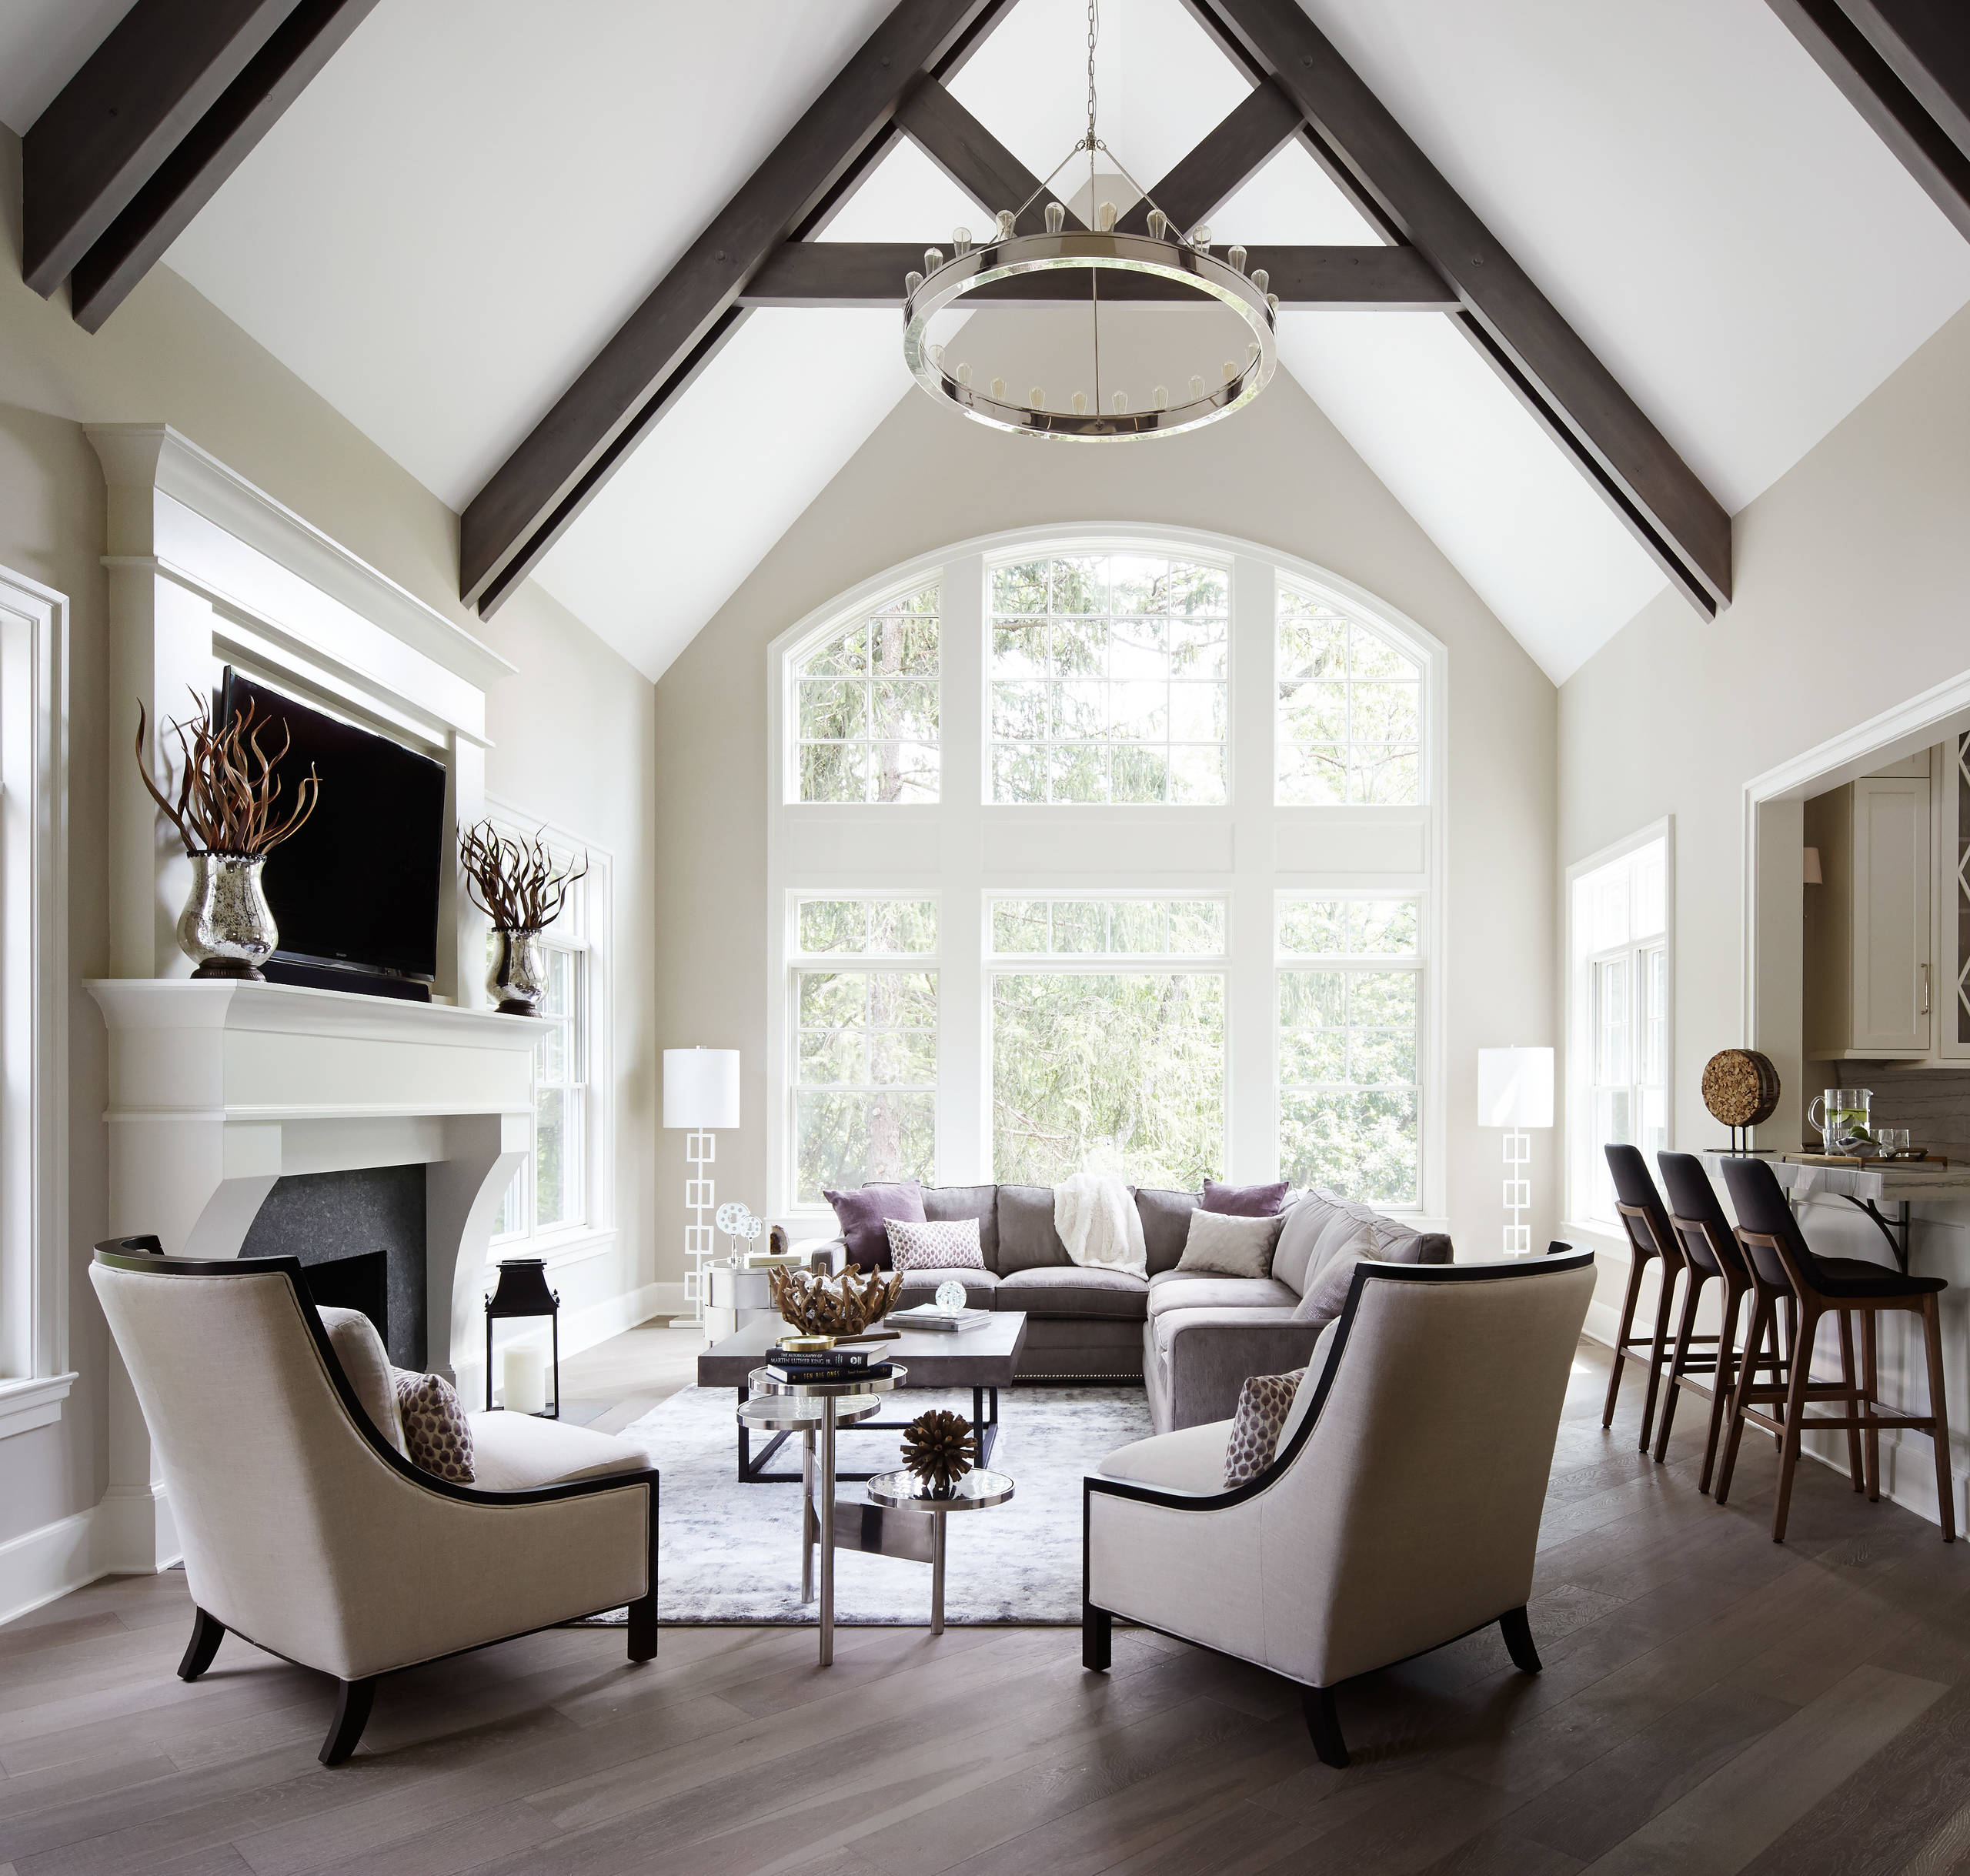 75 Beautiful Living Room With A Bar Pictures Ideas February 2021 Houzz